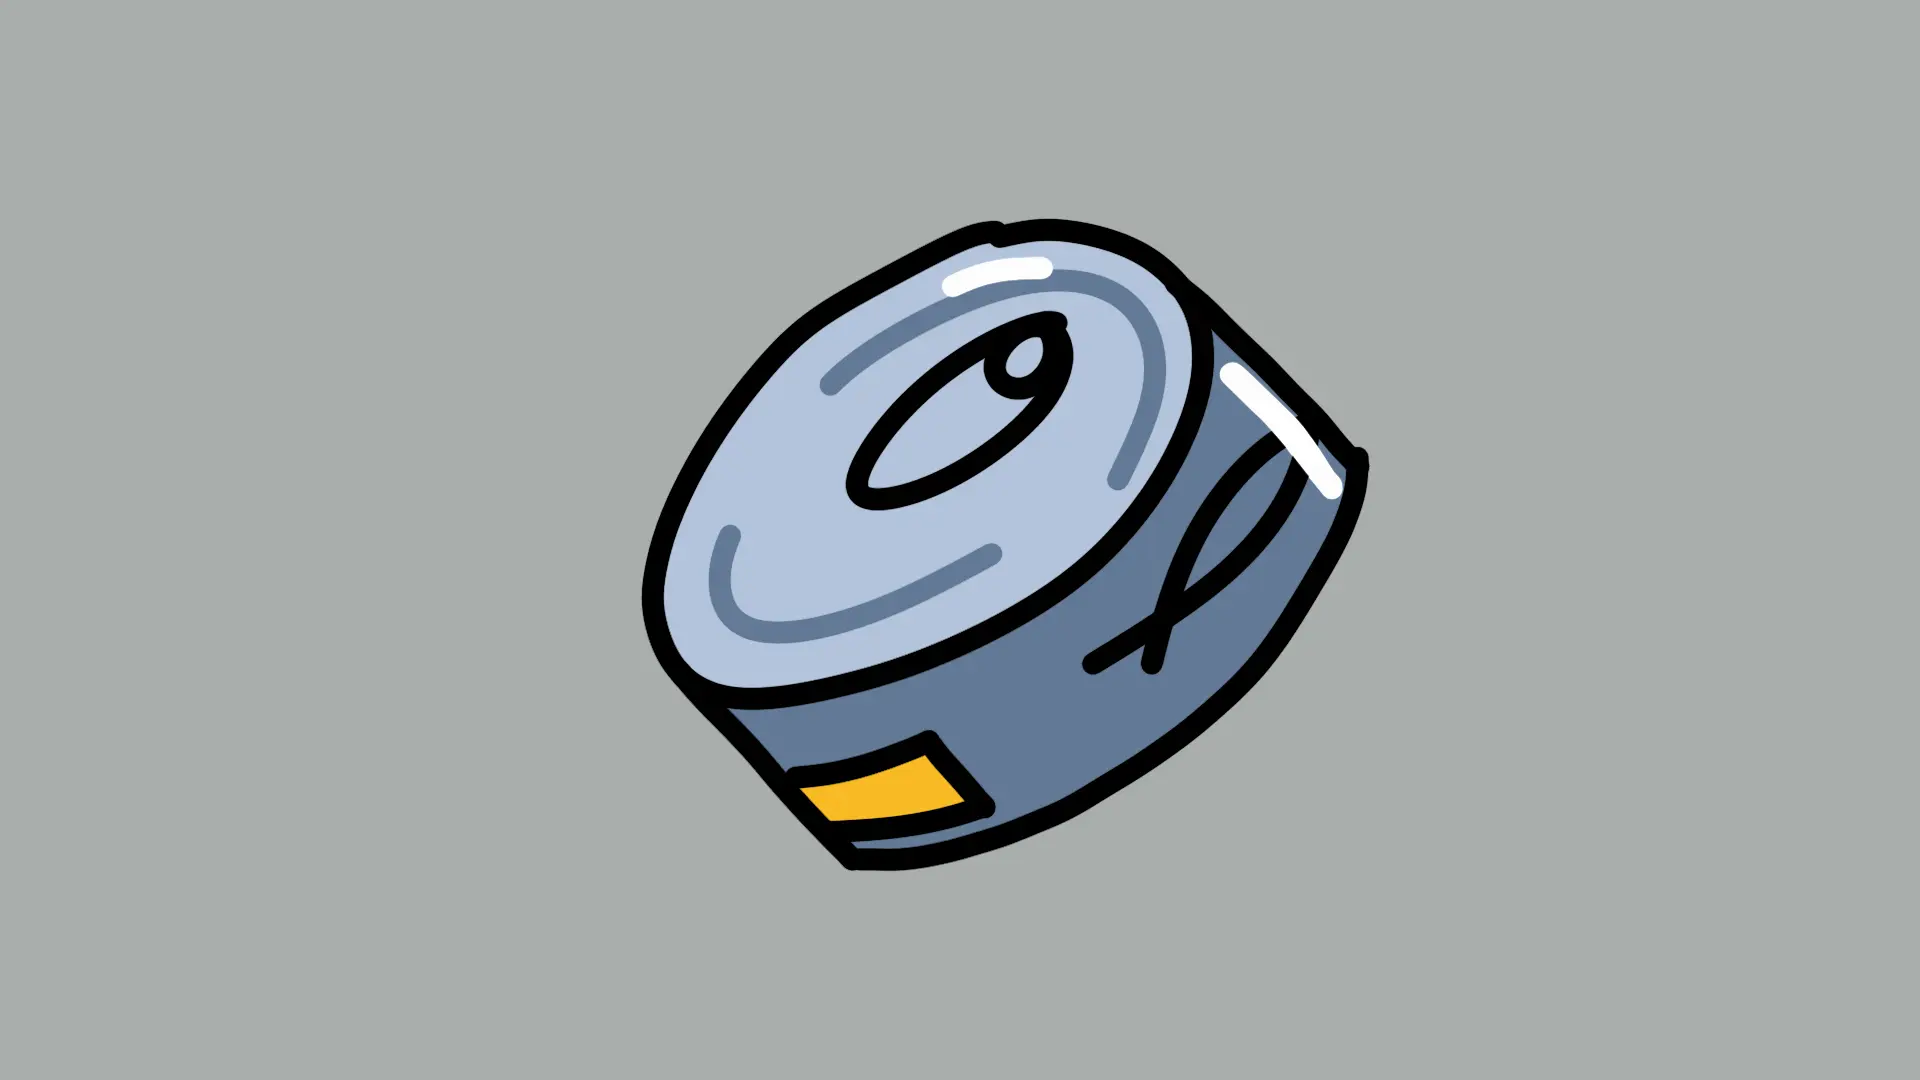 Frame by Frame Animation of a tuna can